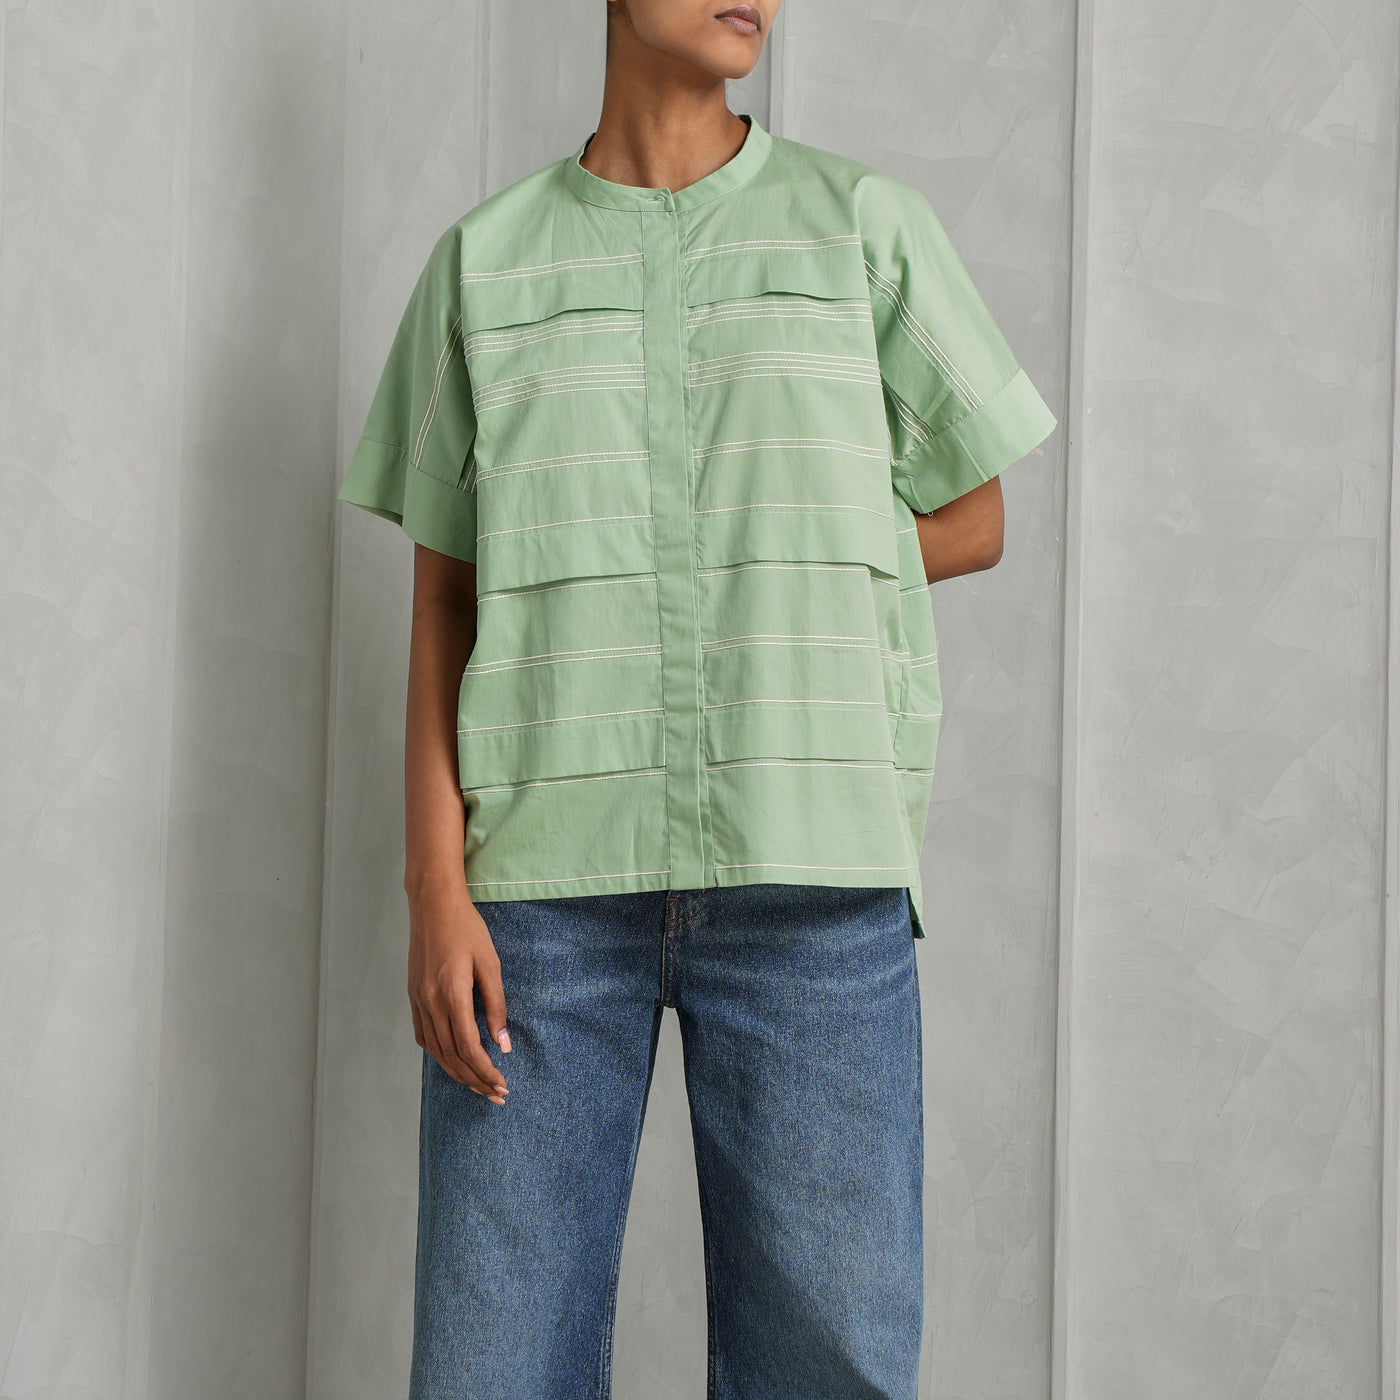 Fence Day Pleated Shirt